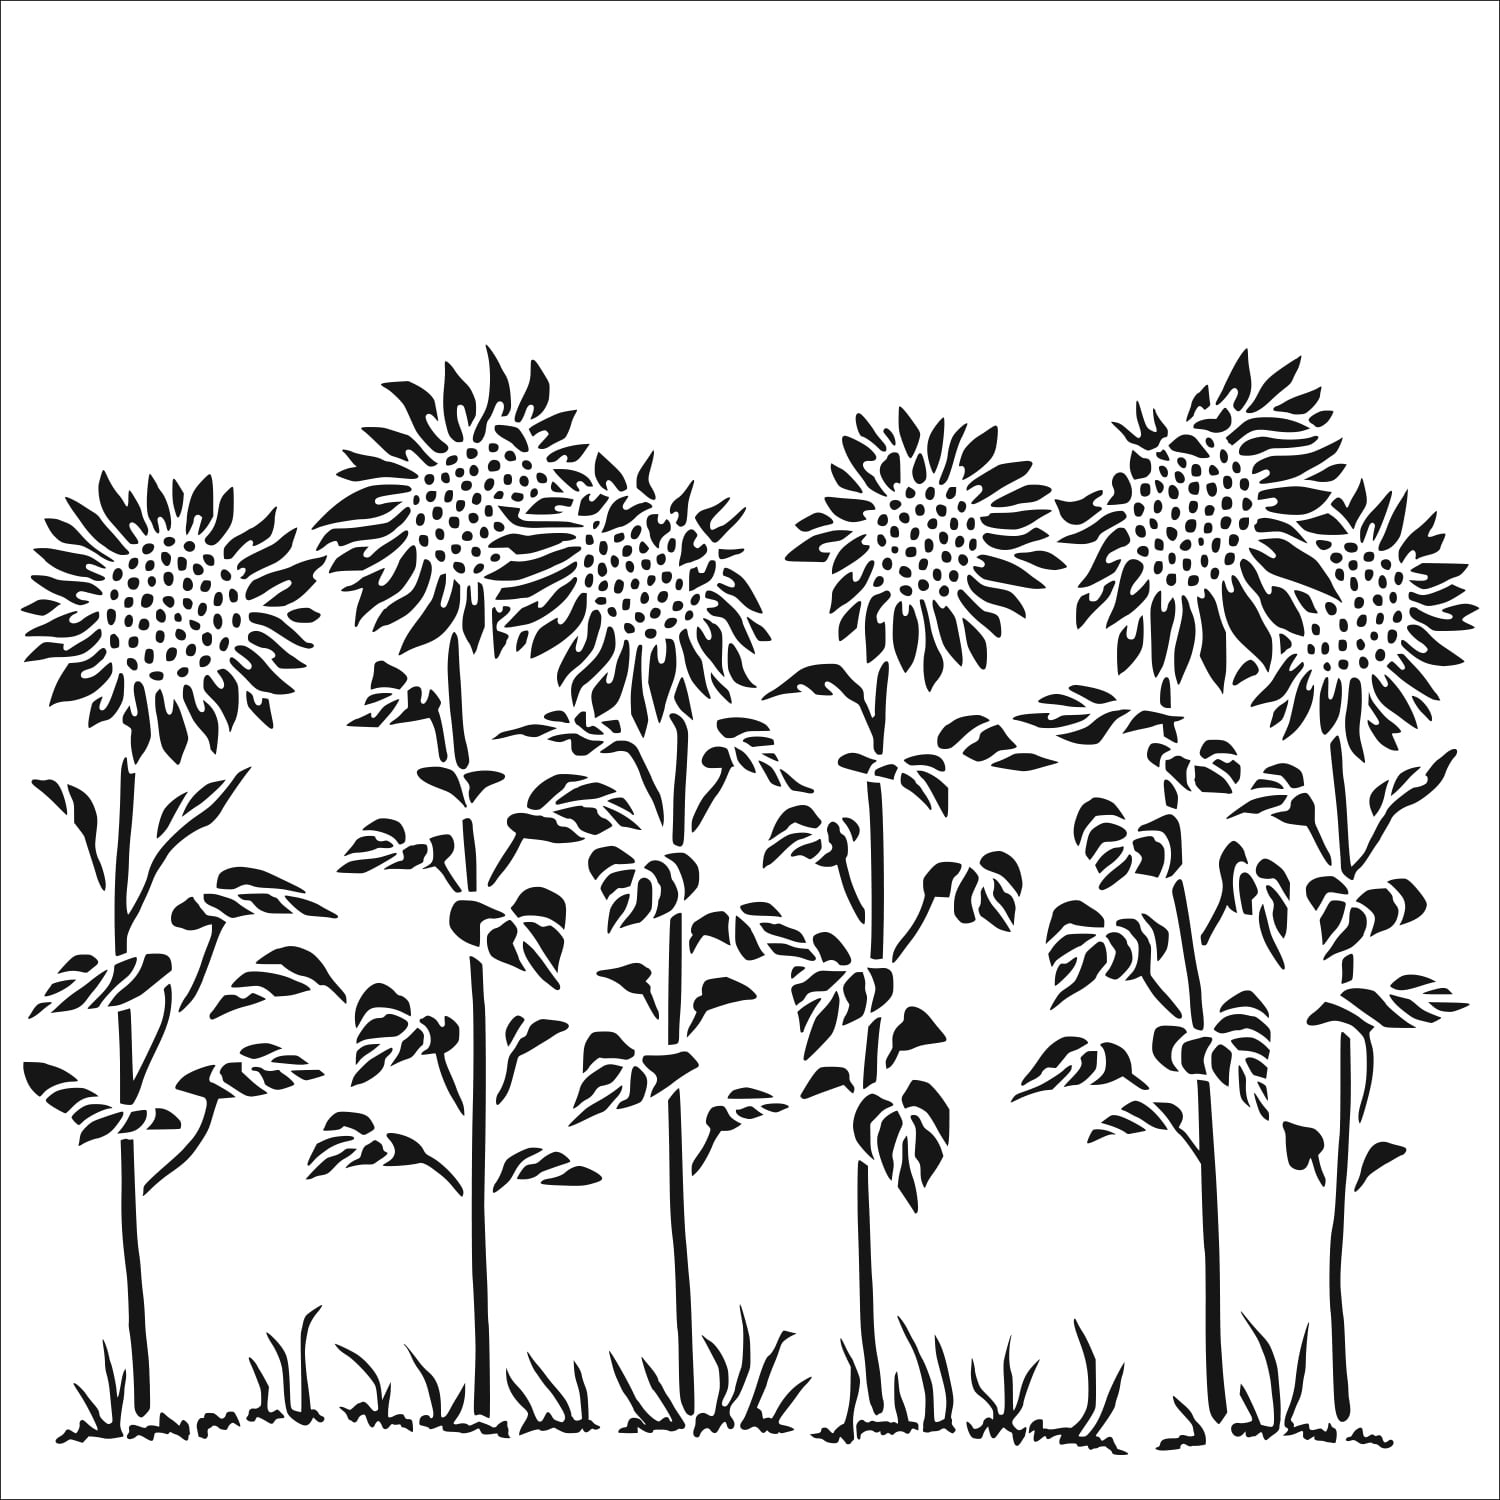 Tcw863 Sunflower Meadow The Crafter S Workshop Stencils And